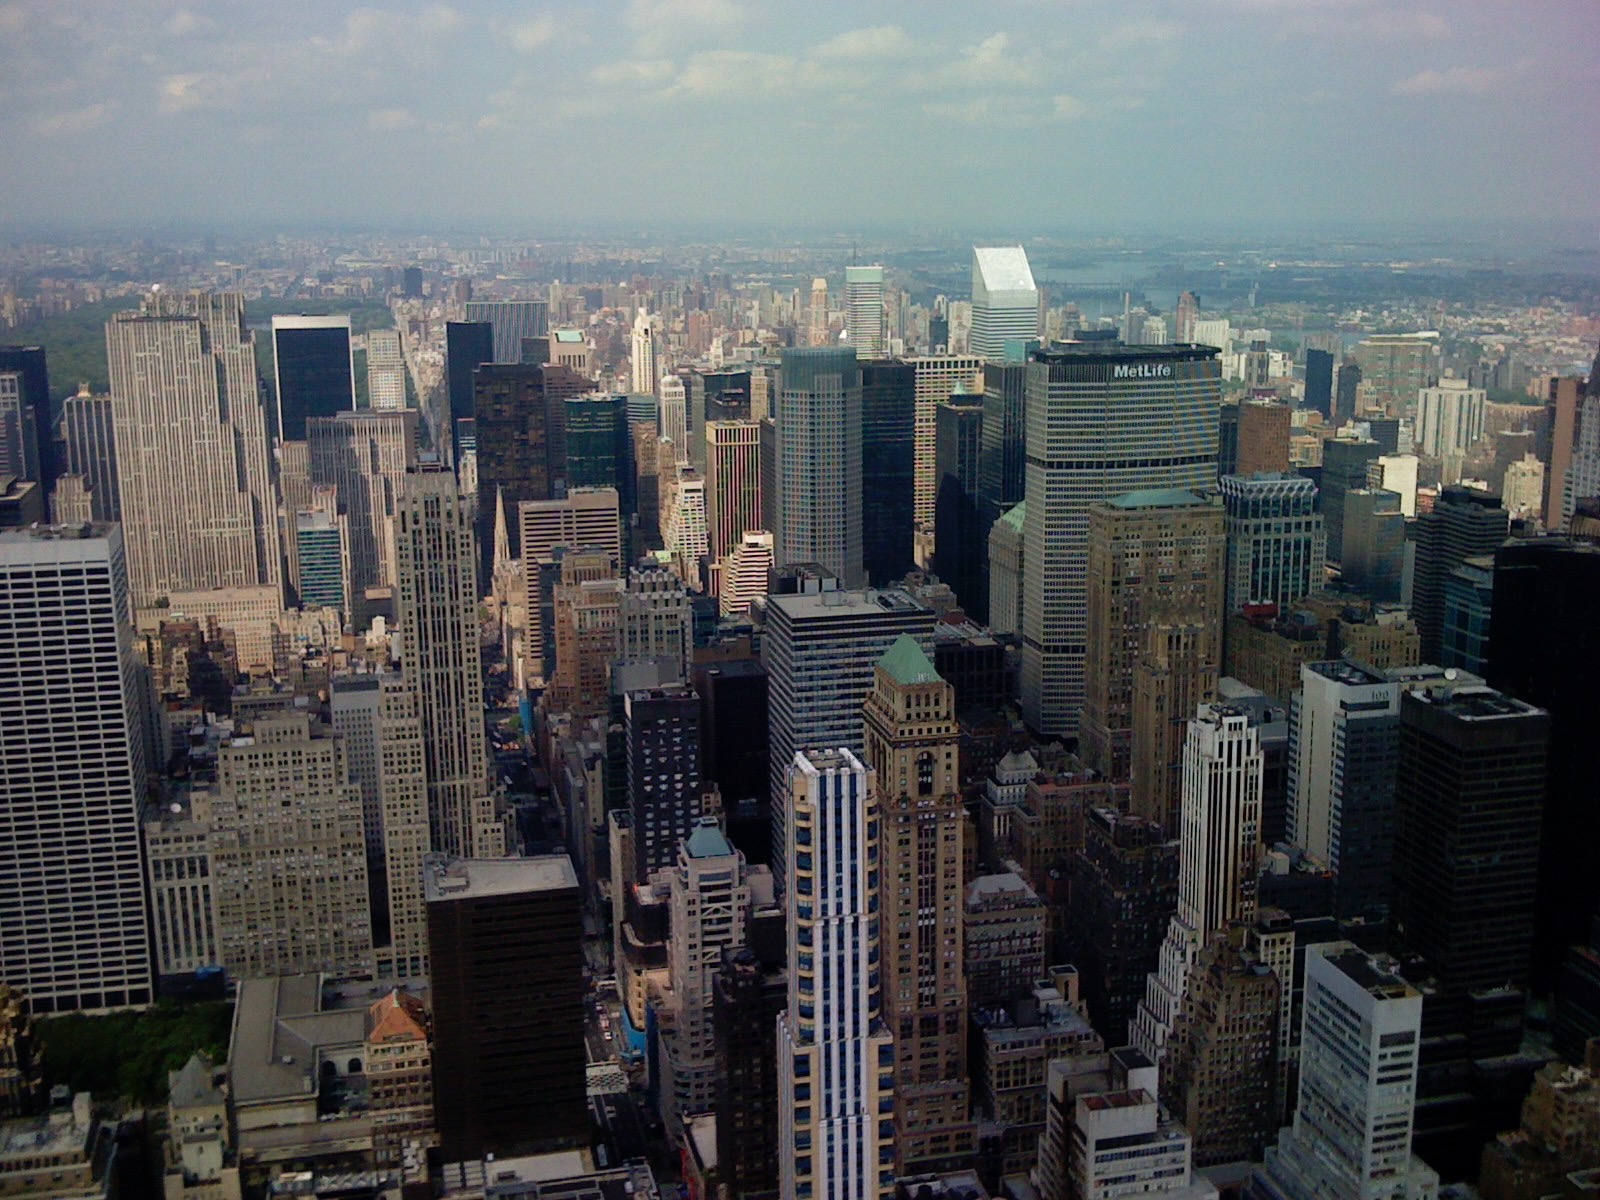 NYC from above, May 2008